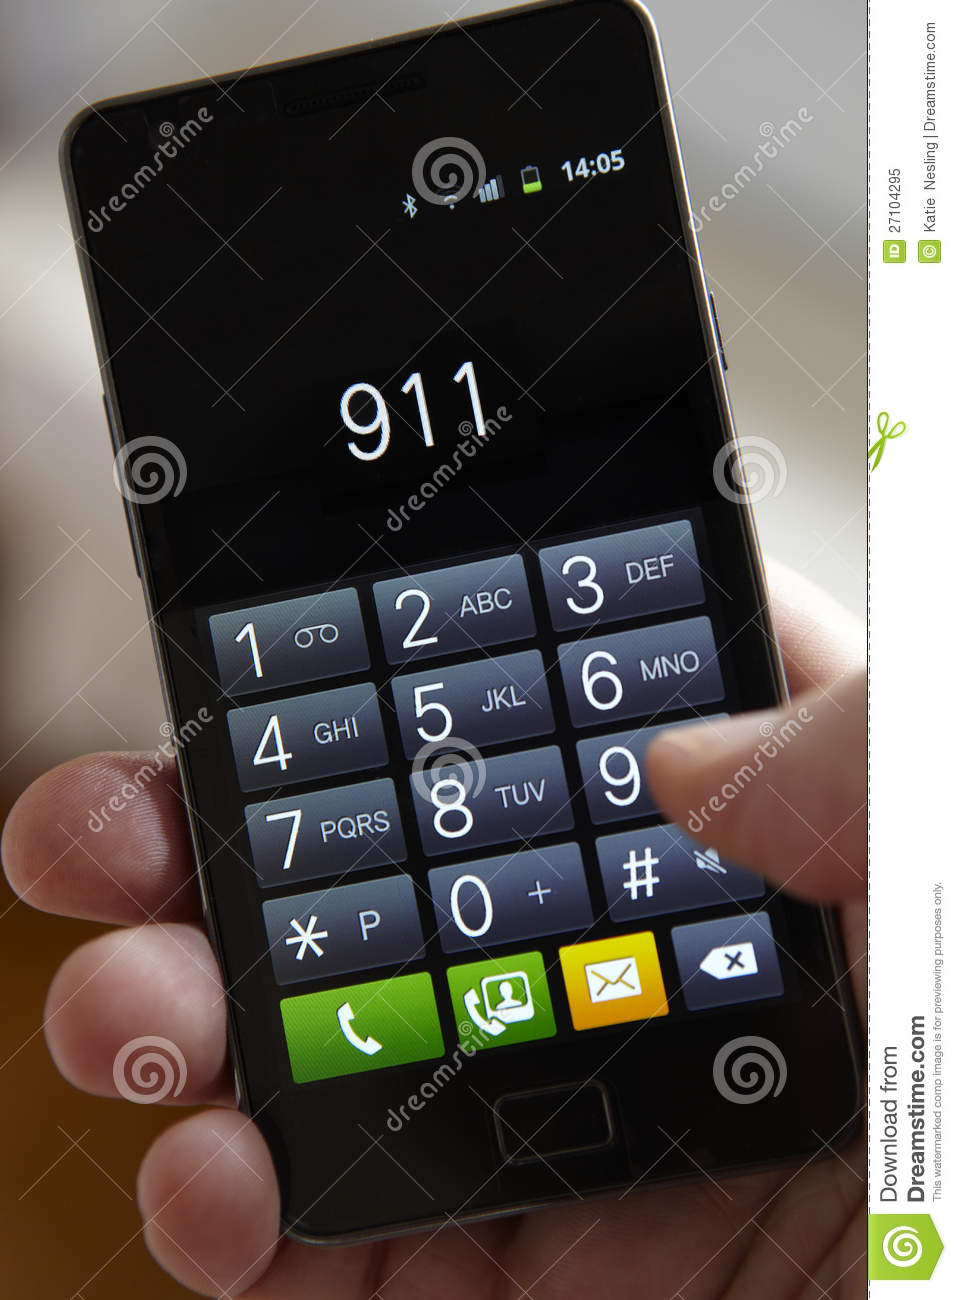 Hand Dialling 911 On Mobile Phone Royalty Free Stock Photo   Image    